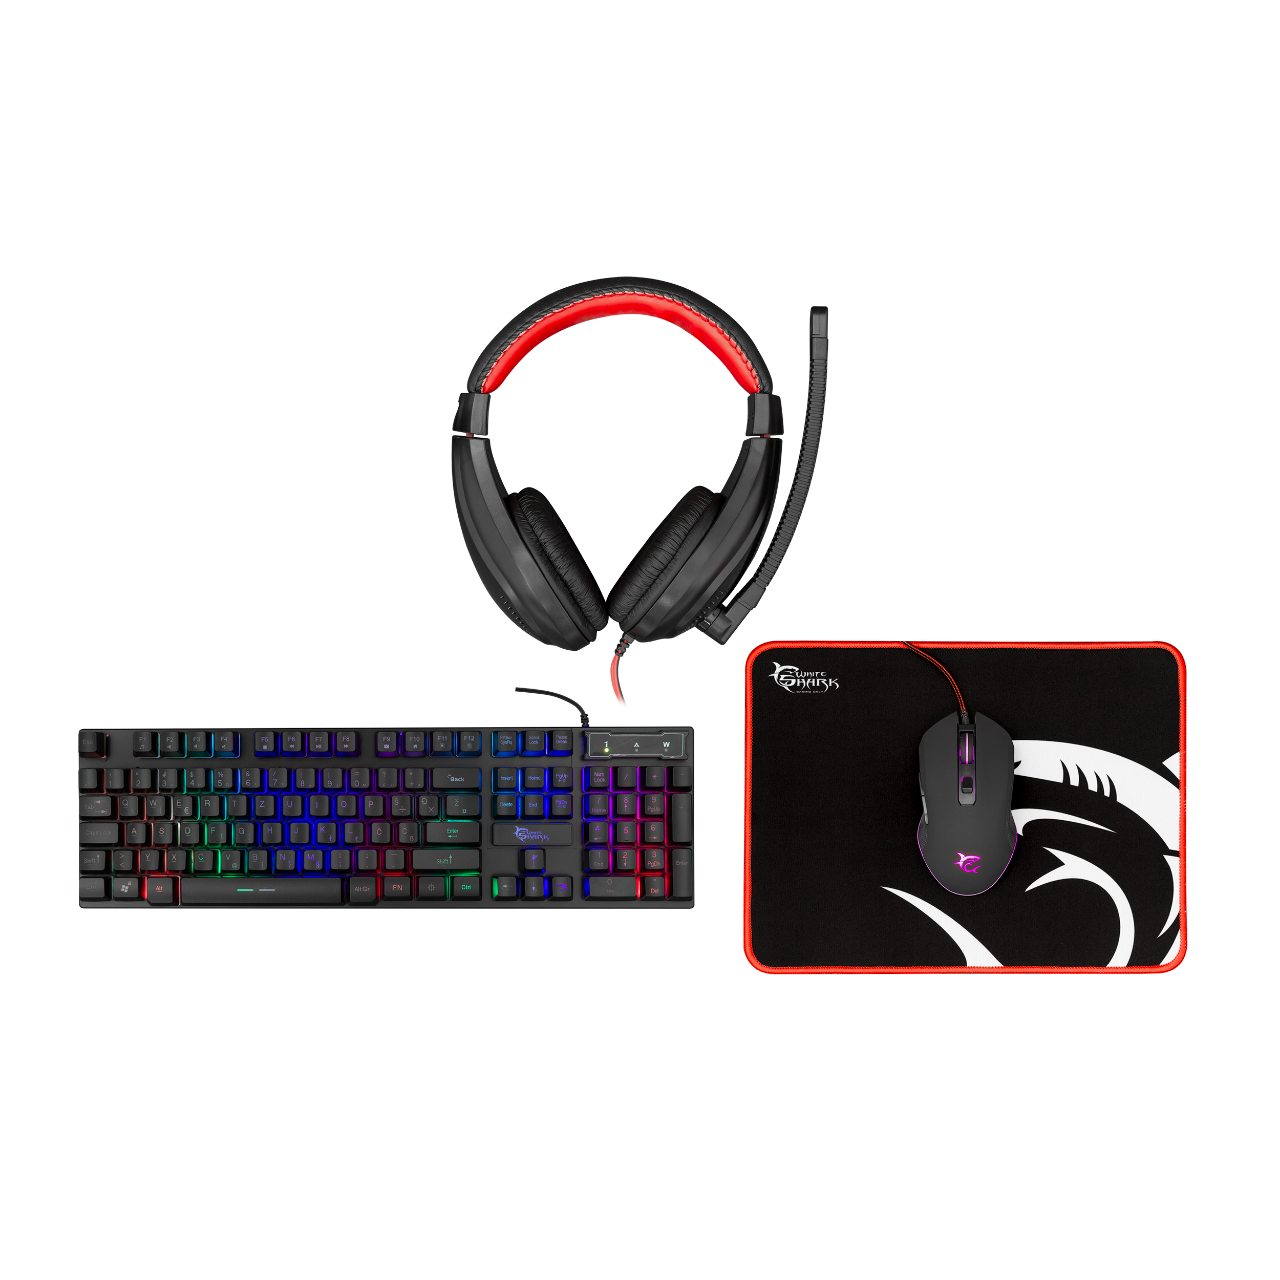 Clavier + Souris + Casque + tapis White Shark Gaming - Comanche 3 - 4 in 1 Gaming Combo